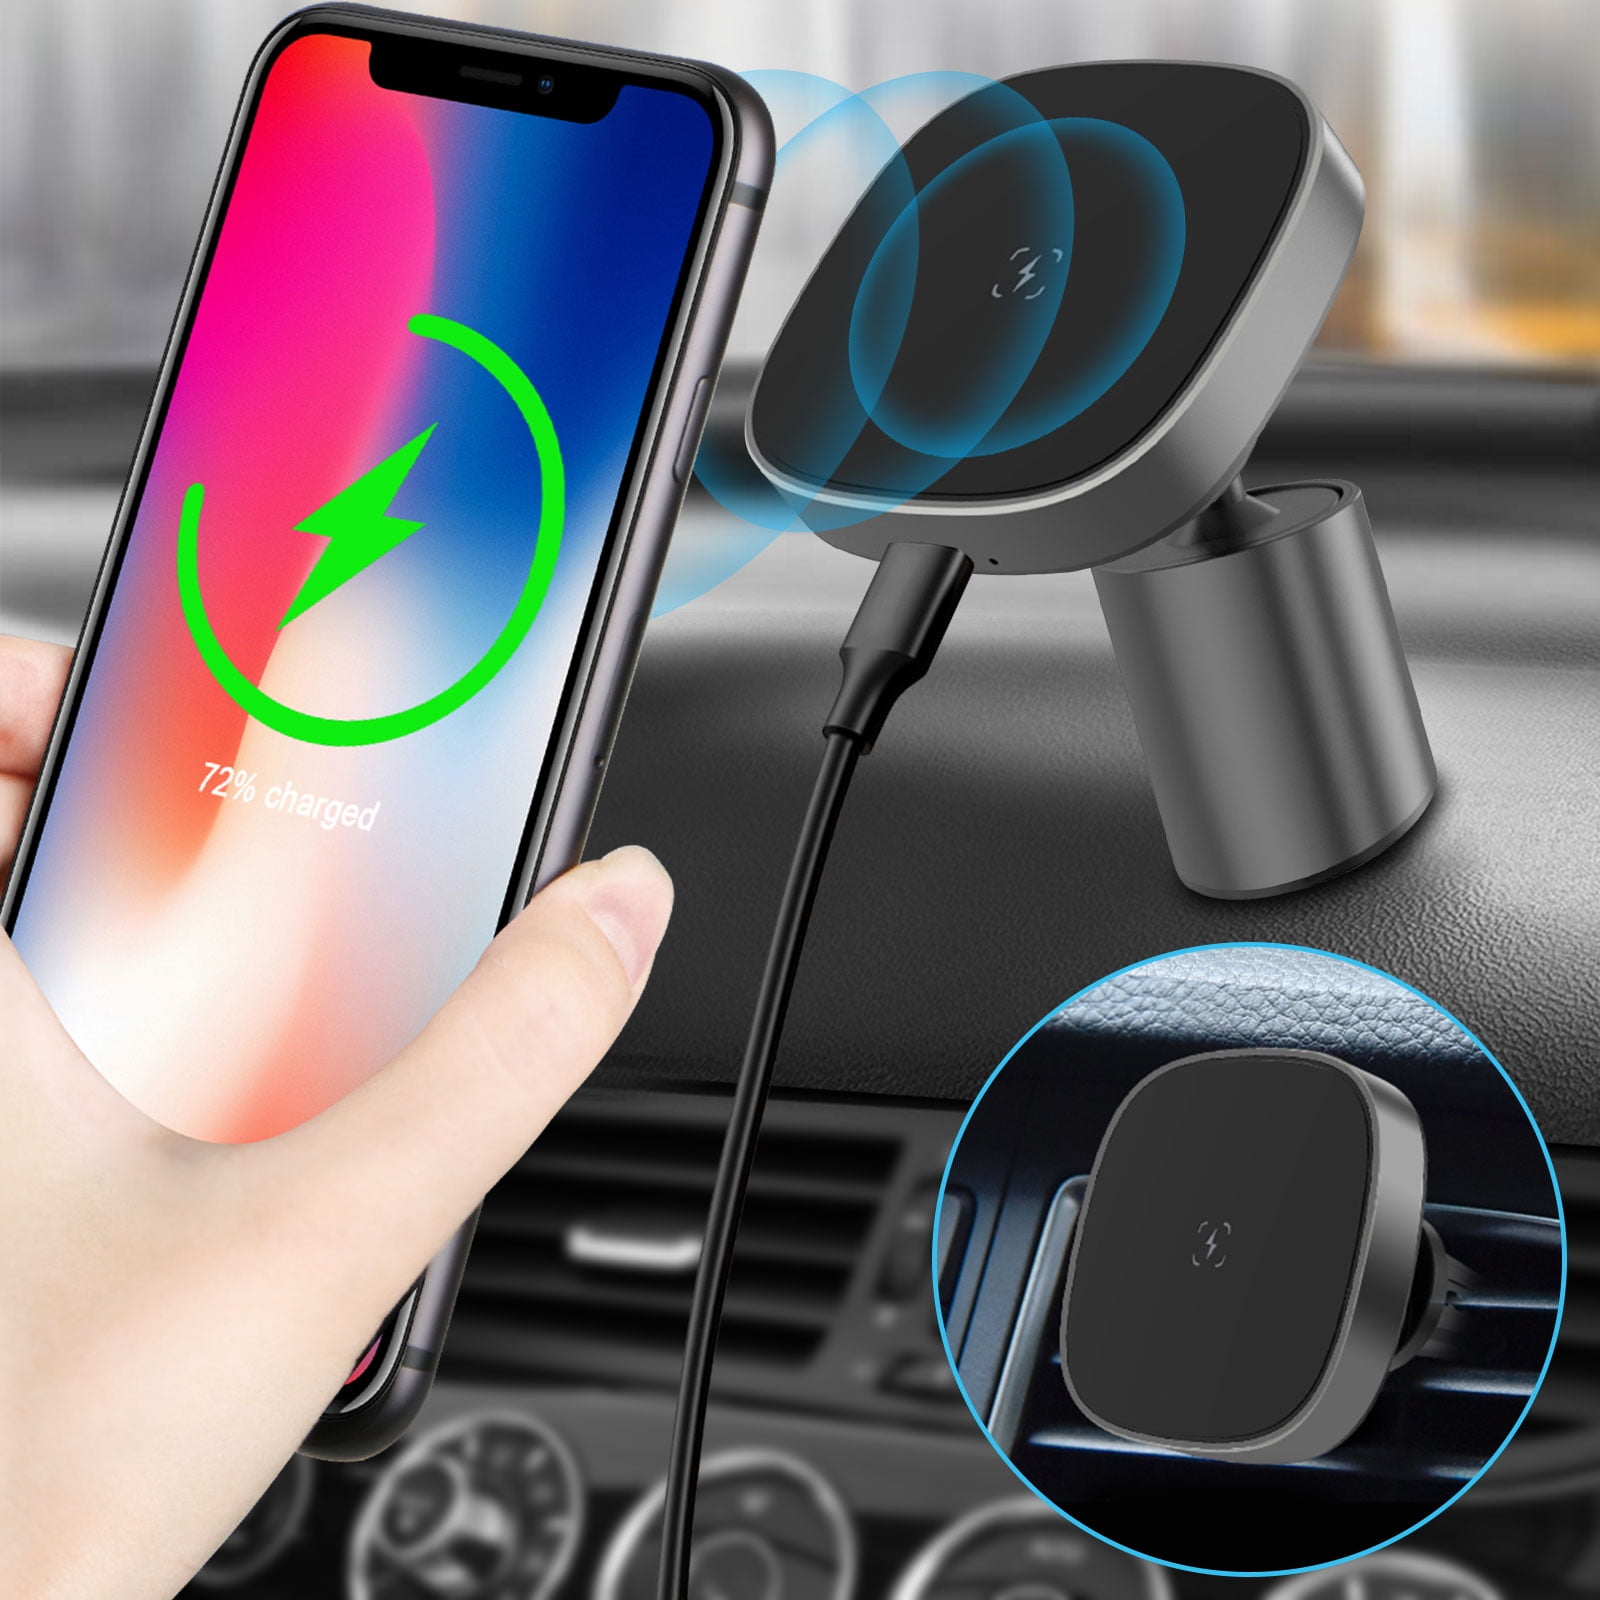 Samsung Galaxy S10/S9/S8 Note 10/9 APPS2Car Max 15W Fast Wireless Car Charger Mount Auto Clamping Dashboard Windshield Phone Holder Compatible iPhone 11/11 Pro Max/Xs Max/Xs/XR/X/8 